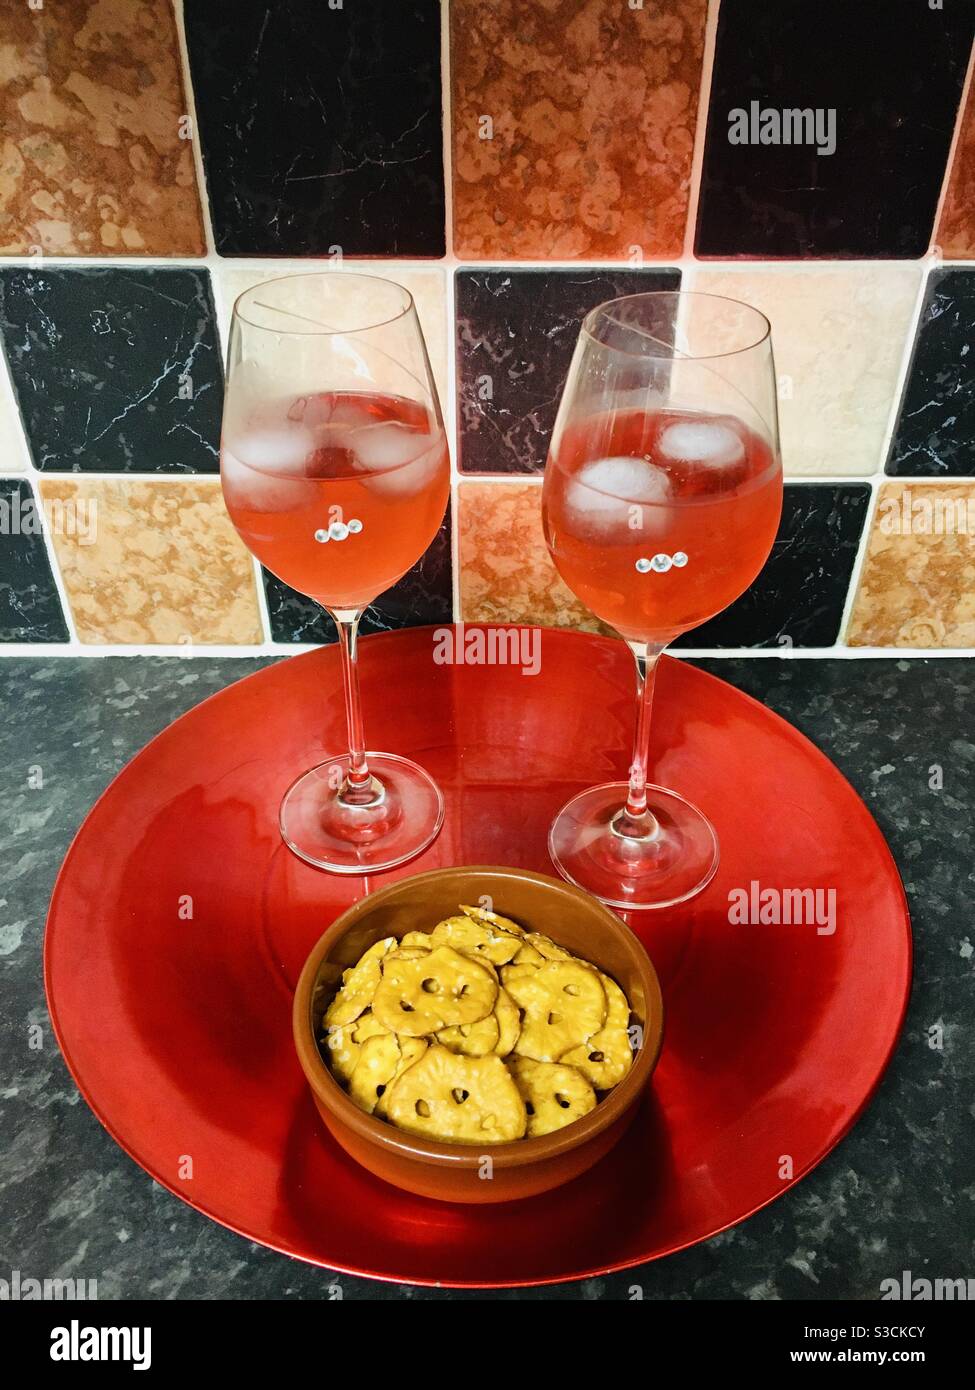 Red Gin Cocktails with pretzel snacks on a metallic red tray Stock Photo